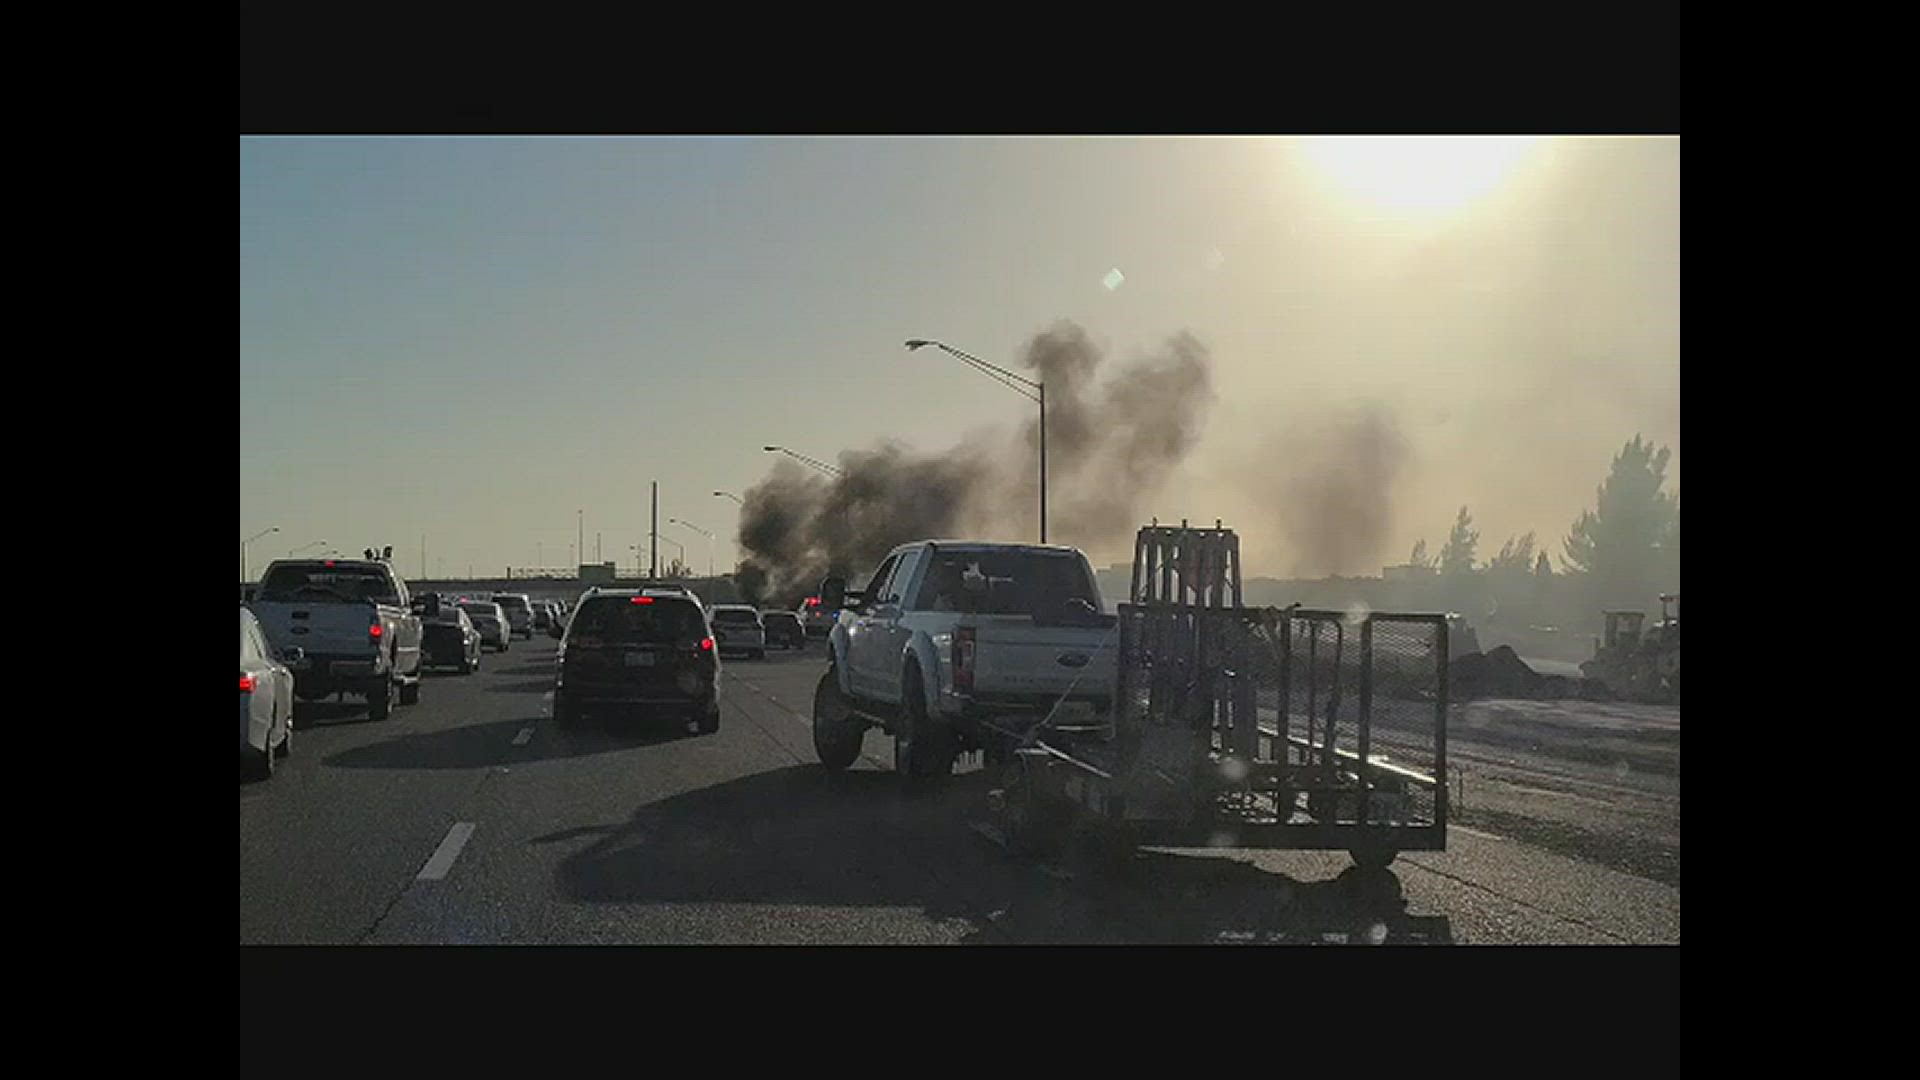 Don Dempsey provided this video of a car that caught fire near the Howard Frankland Bridge in St. Pete.